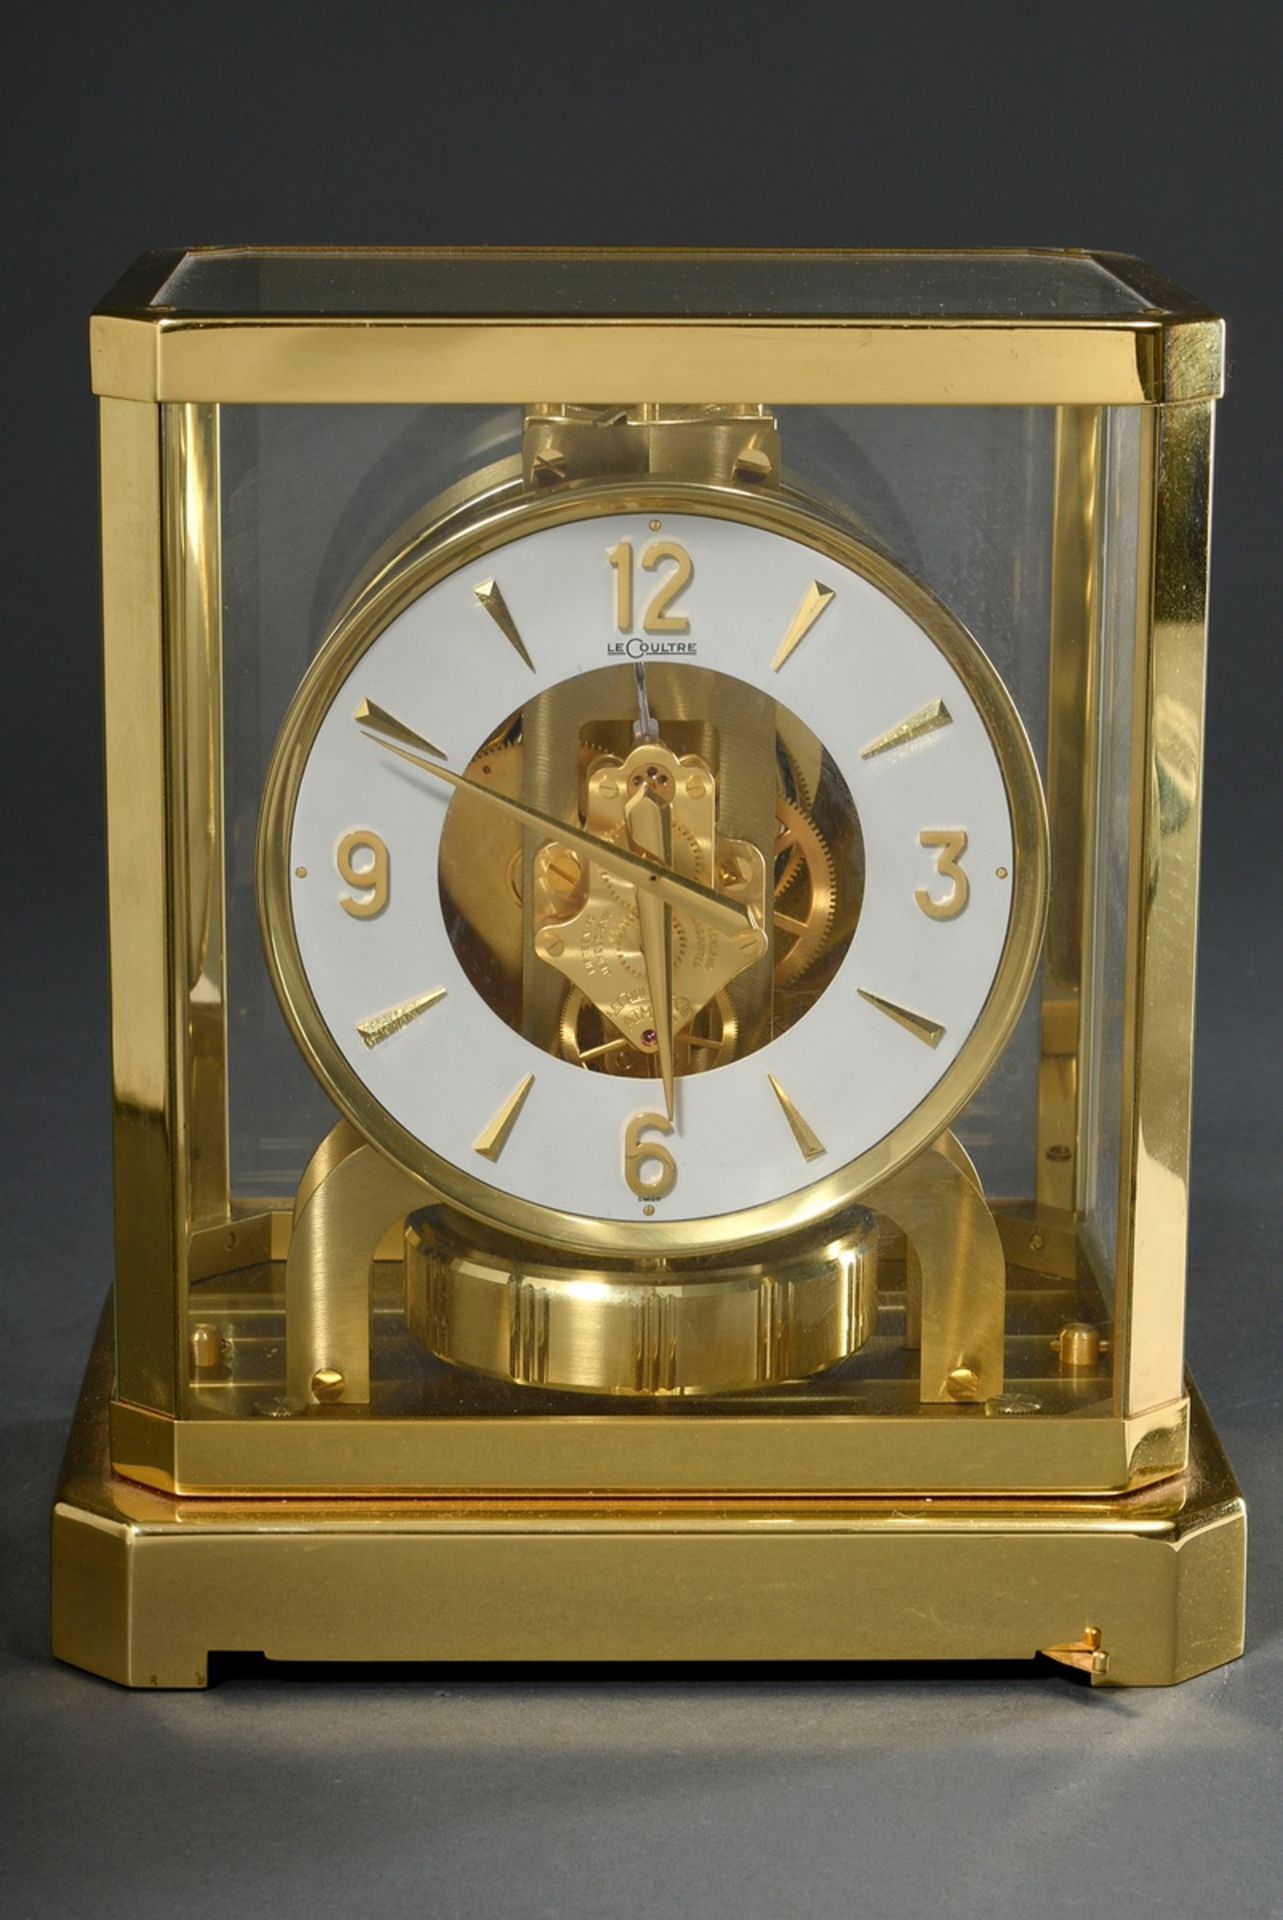 Jaeger Le Coultre "Atmos" table clock, glazed gold-plated brass case, movement number 196633, 23.5x